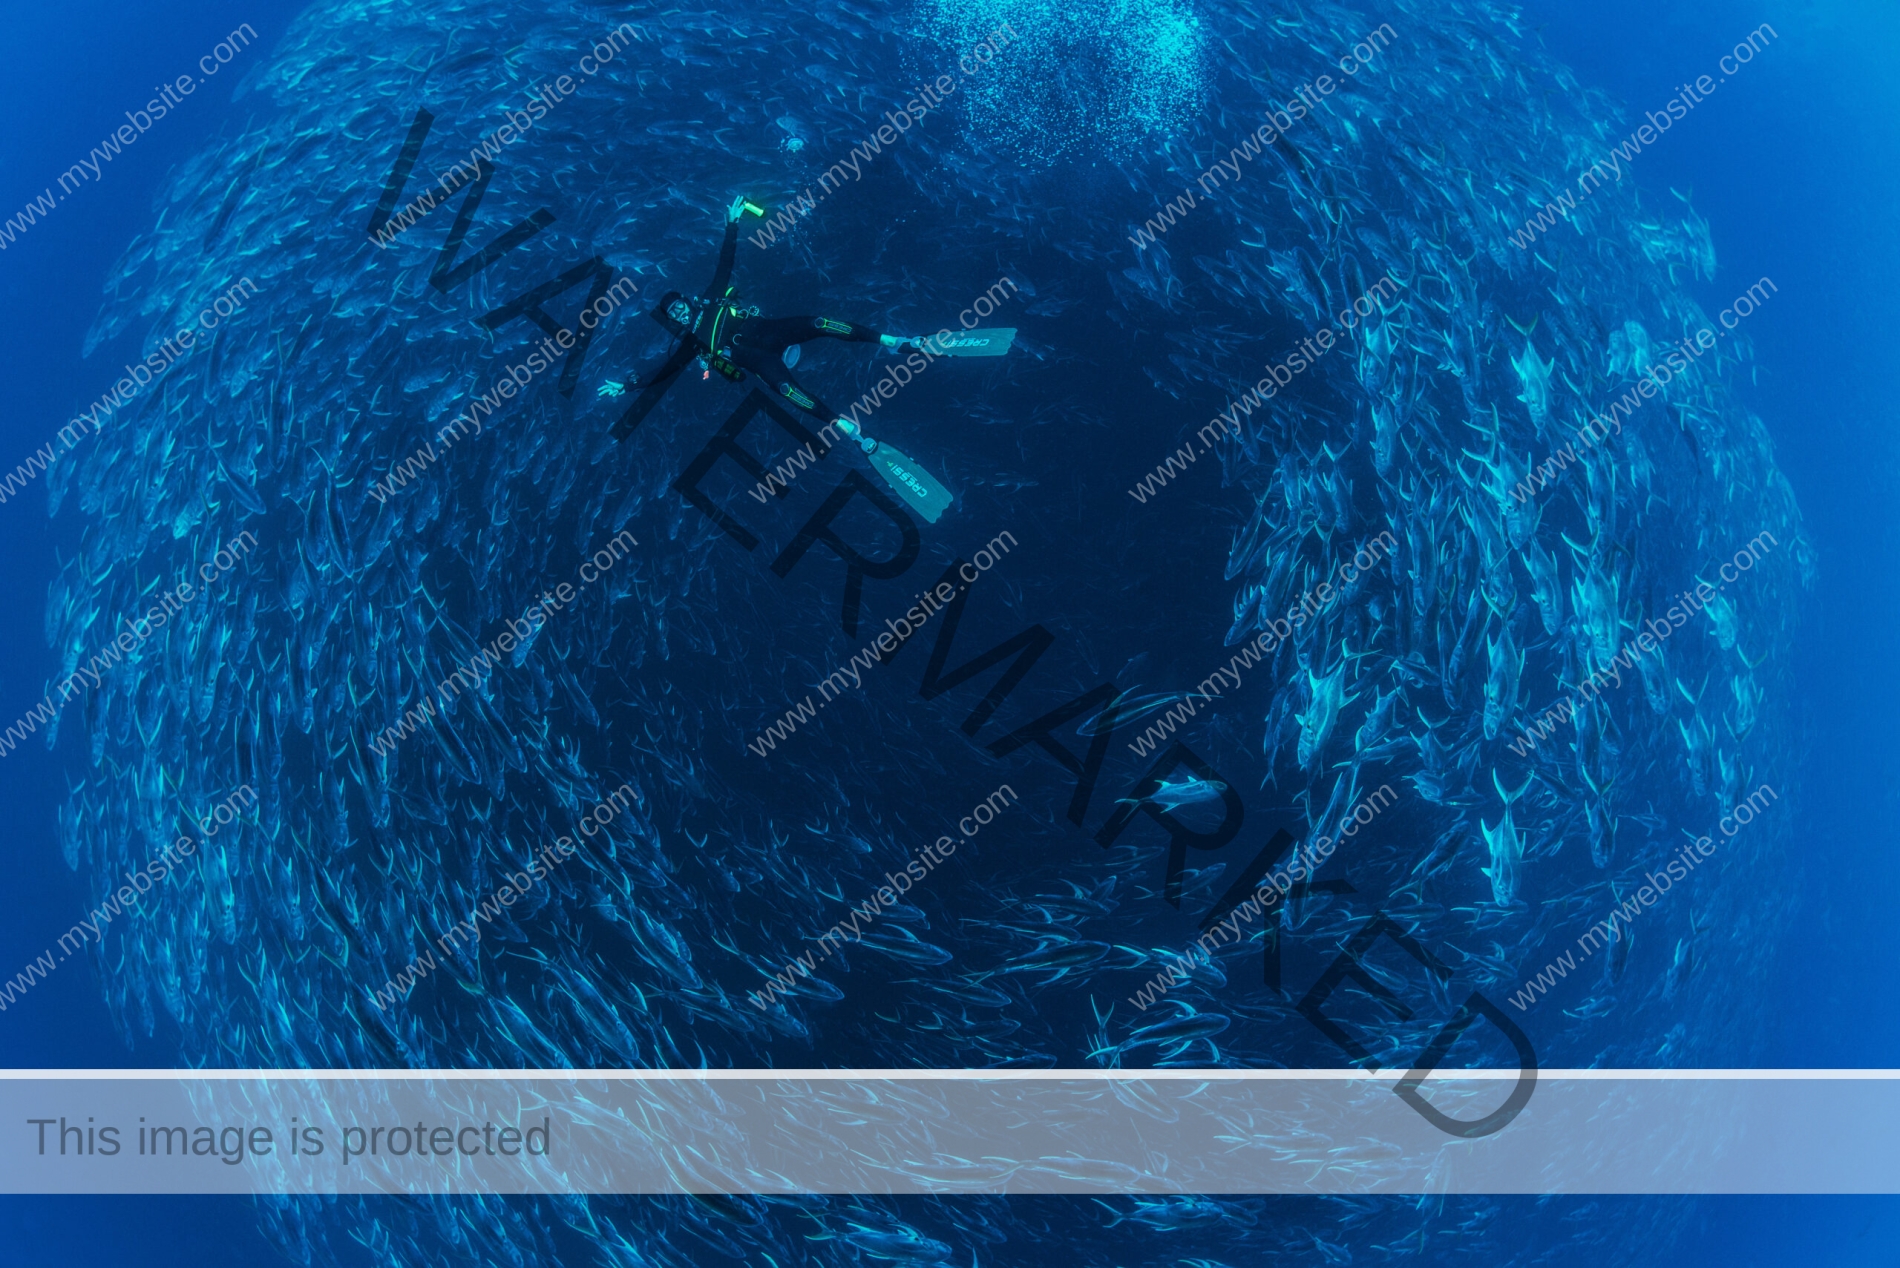 Awe-inspiring deep blue underwater photograph by award-winning Costa Rican photographer Edwar Herreno. A huge bait ball swirls around the frame with a diver, looking tiny in comparison, posing in front of the fish. The image evokes feelings of wonder and surprise. Bull Jack photograph